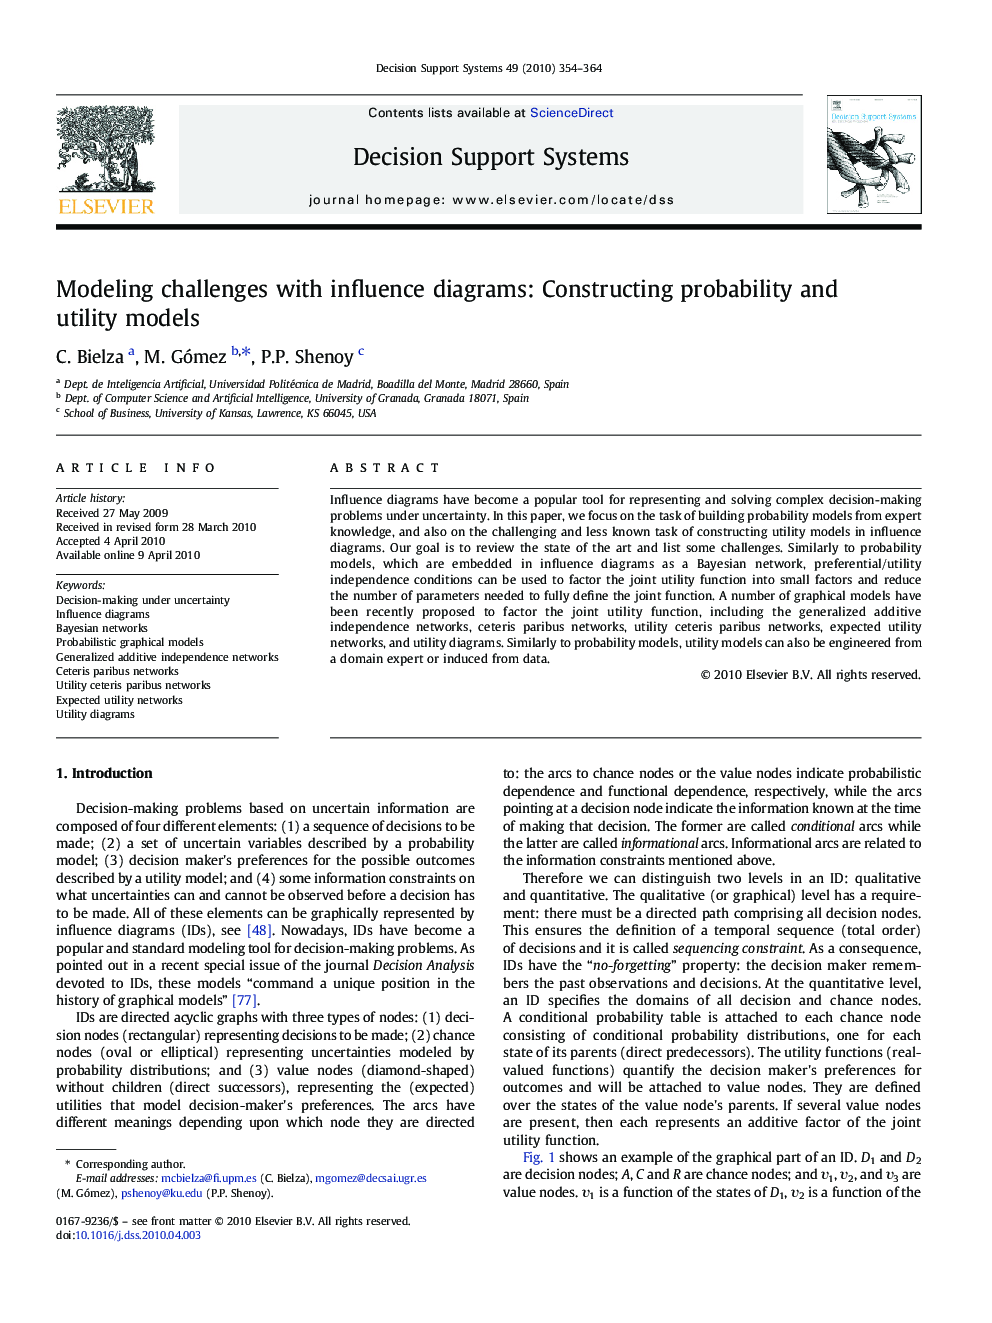 Modeling challenges with influence diagrams: Constructing probability and utility models